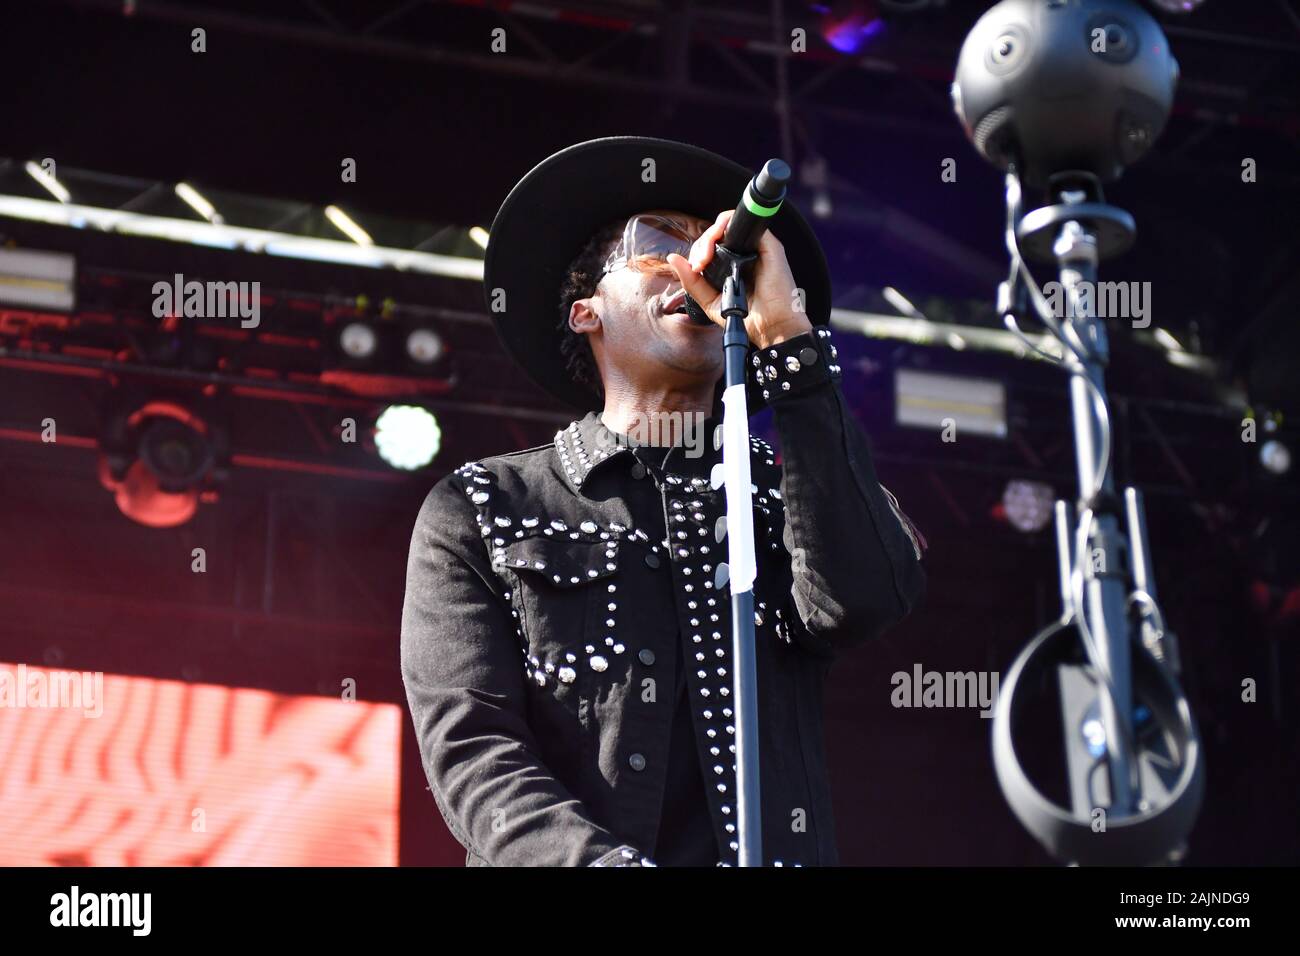 Atlanta, GA / USA - September 8, 2019: Raphael Saadiq performs during second day of the 2019 One Music Fest at Centennial Olympic Park. Stock Photo